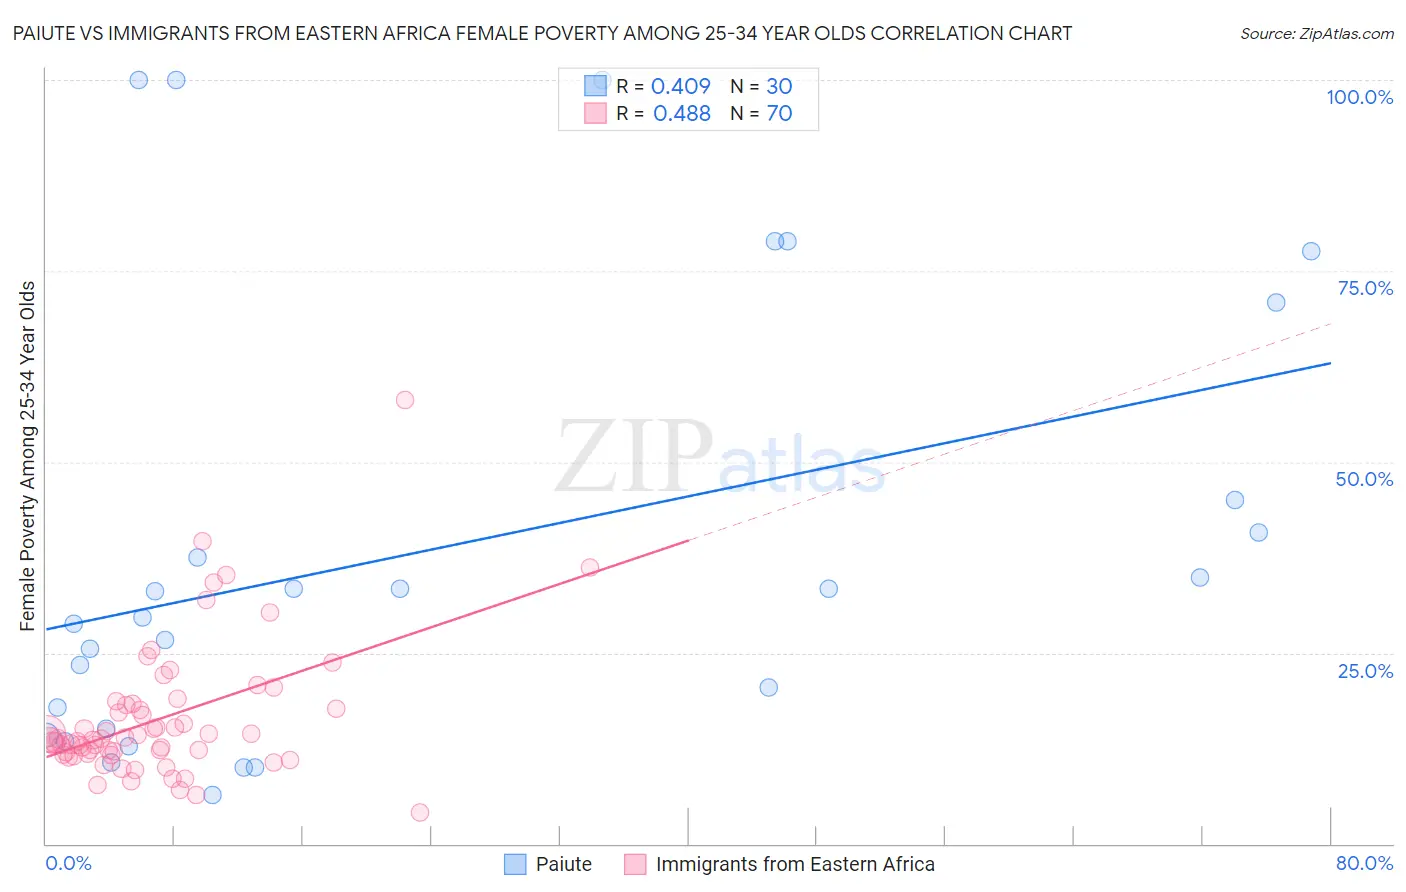 Paiute vs Immigrants from Eastern Africa Female Poverty Among 25-34 Year Olds